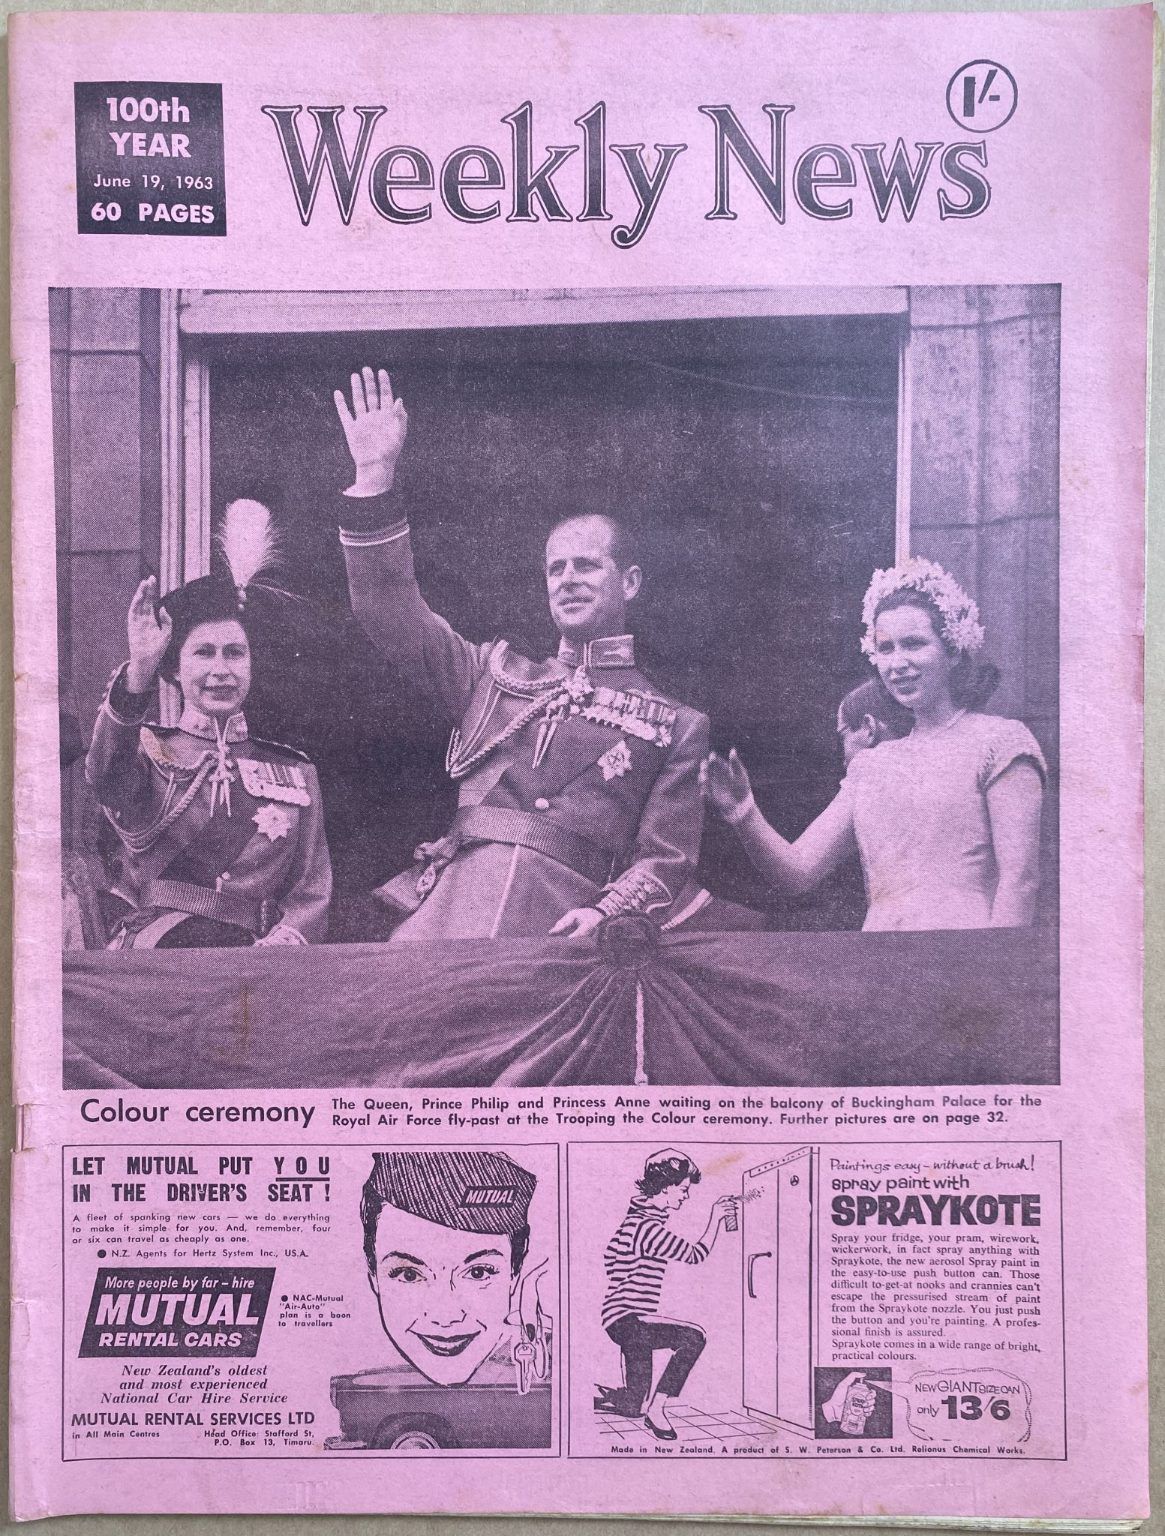 OLD NEWSPAPER: The Weekly News, No. 5195, 19 June 1963